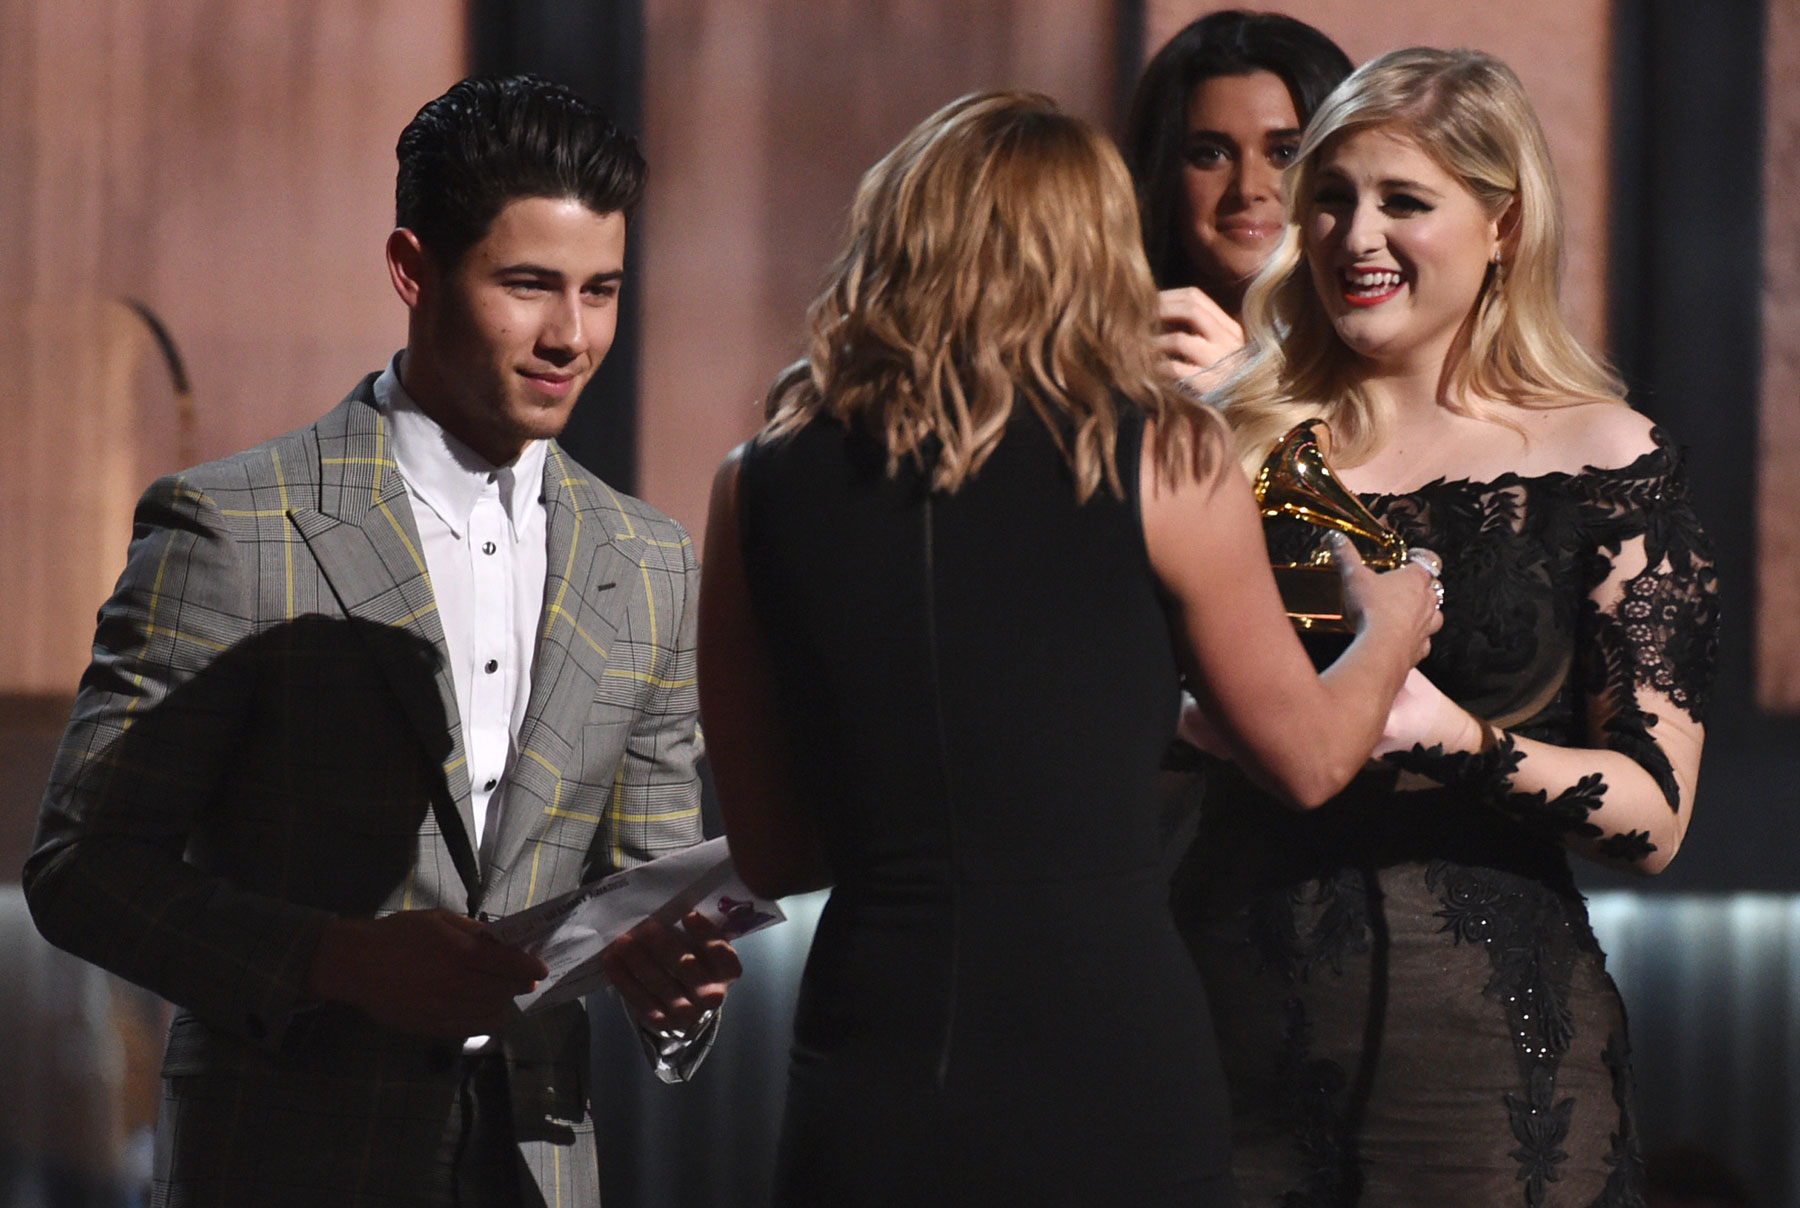 Nick Jonas, left, and Meghan Trainor, right, present Miranda Lambert with the award for best country album for “Platinum” at the 57th annual Grammy Awards on Sunday, Feb. 8, 2015, in Los Angeles. (Photo by John Shearer/Invision/AP)